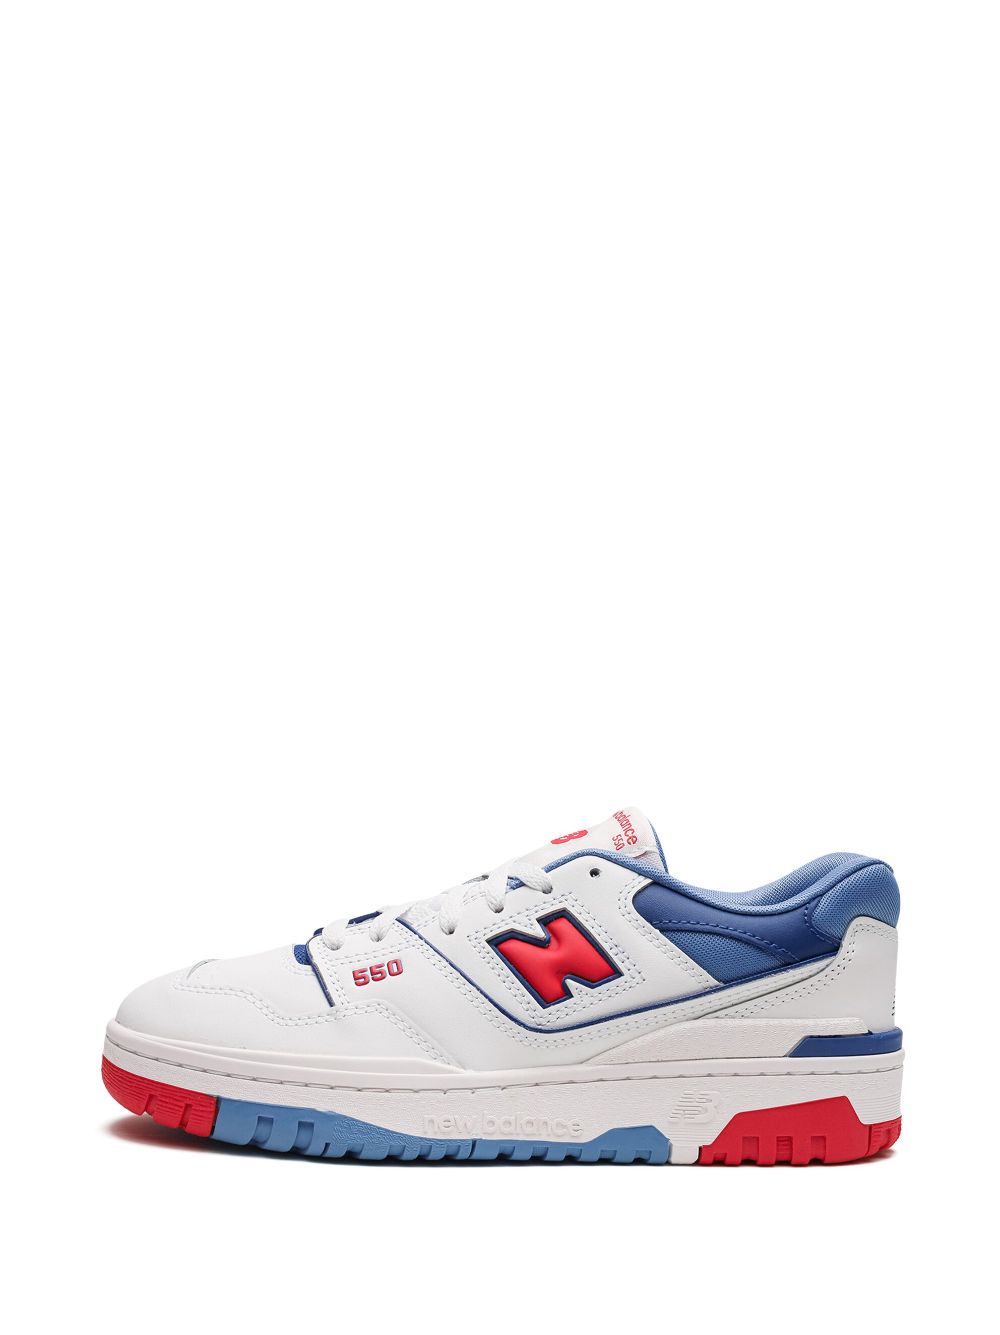 Shop New Balance 550 "white/blue/red" Sneakers